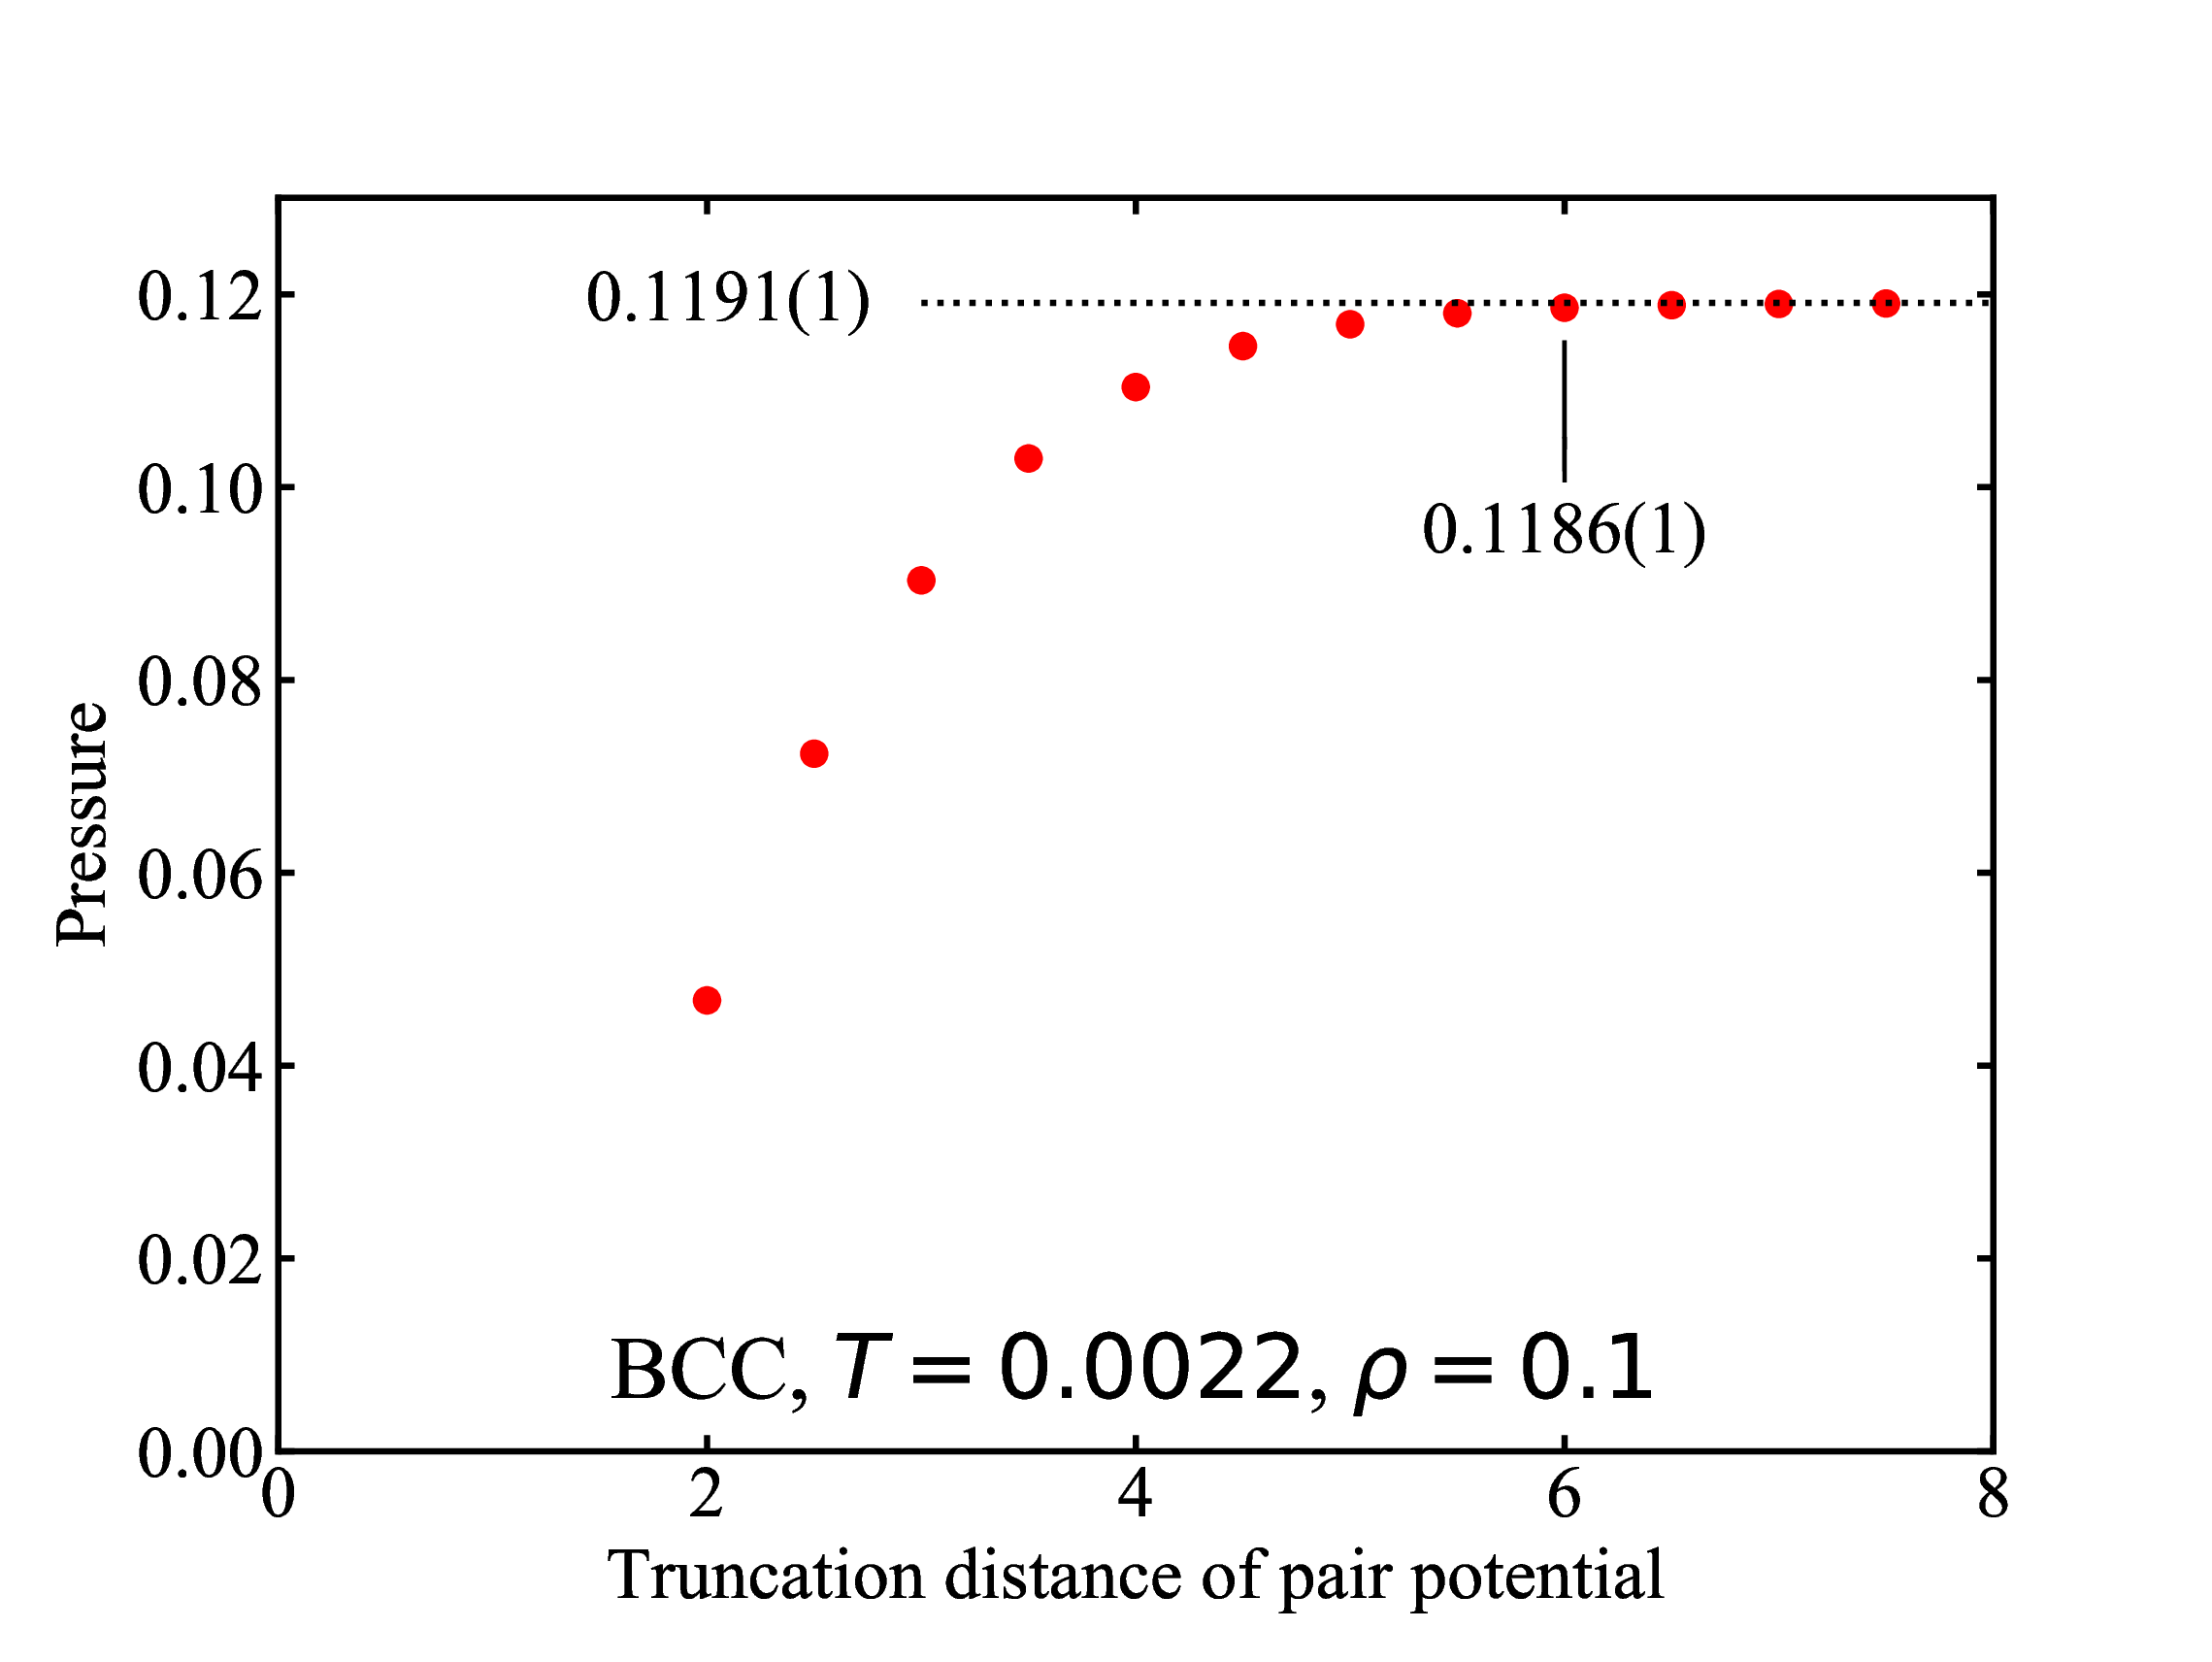 JCP_150_174501_2019_data/fig/fig3.png